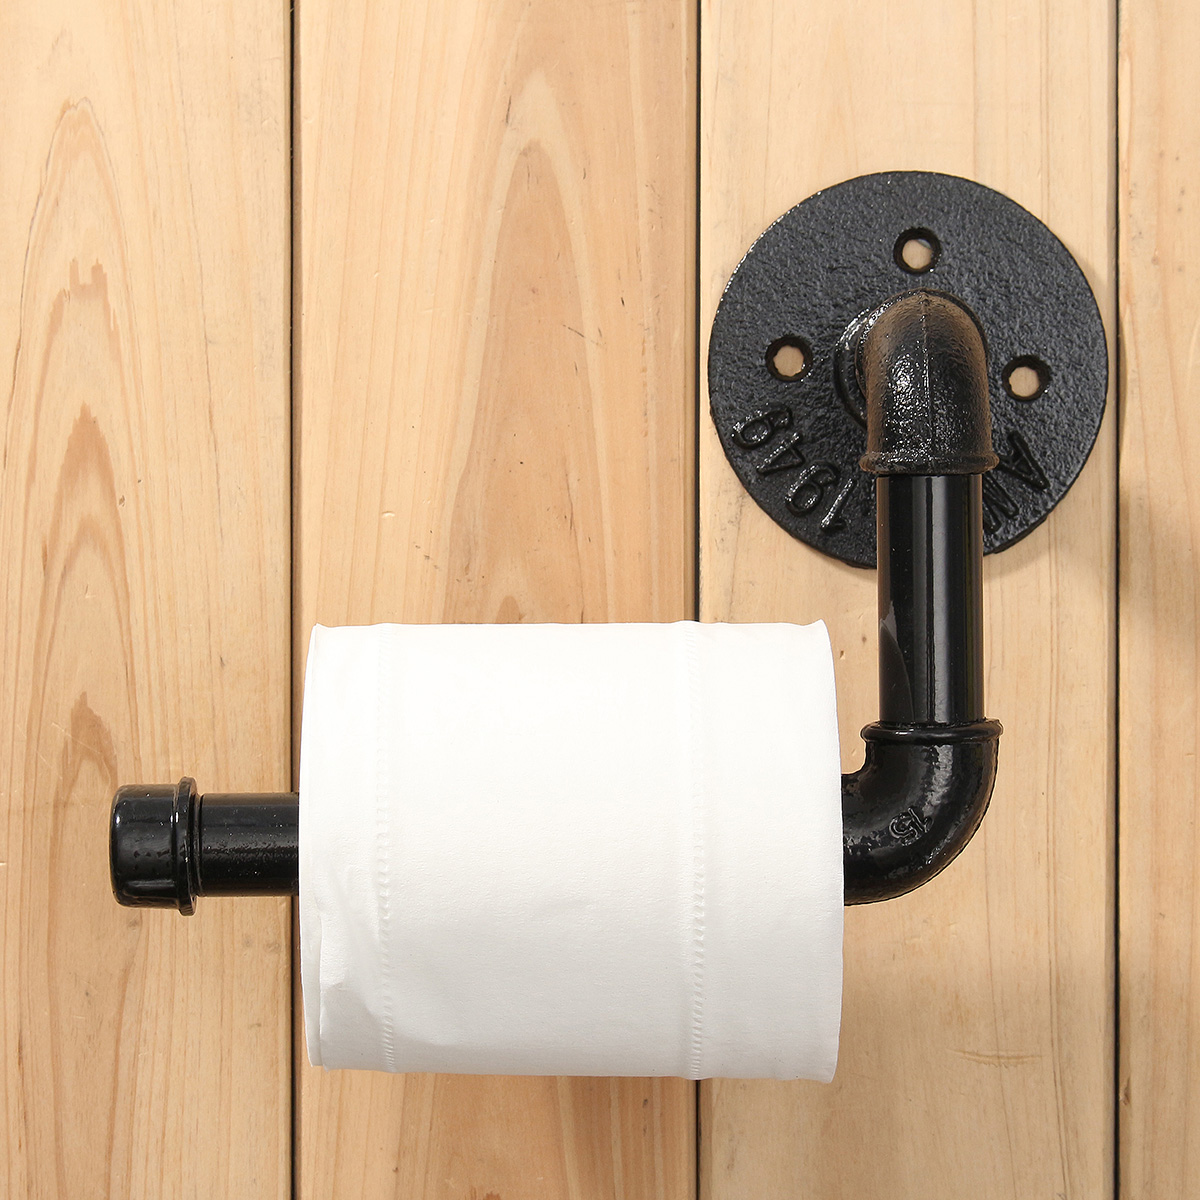 Industrial-Rustic-Style-Iron-Pipe-Wall-Mount-Toilet-Tissue-Paper-Roll-Holder-Towel-Bar-1226340-6